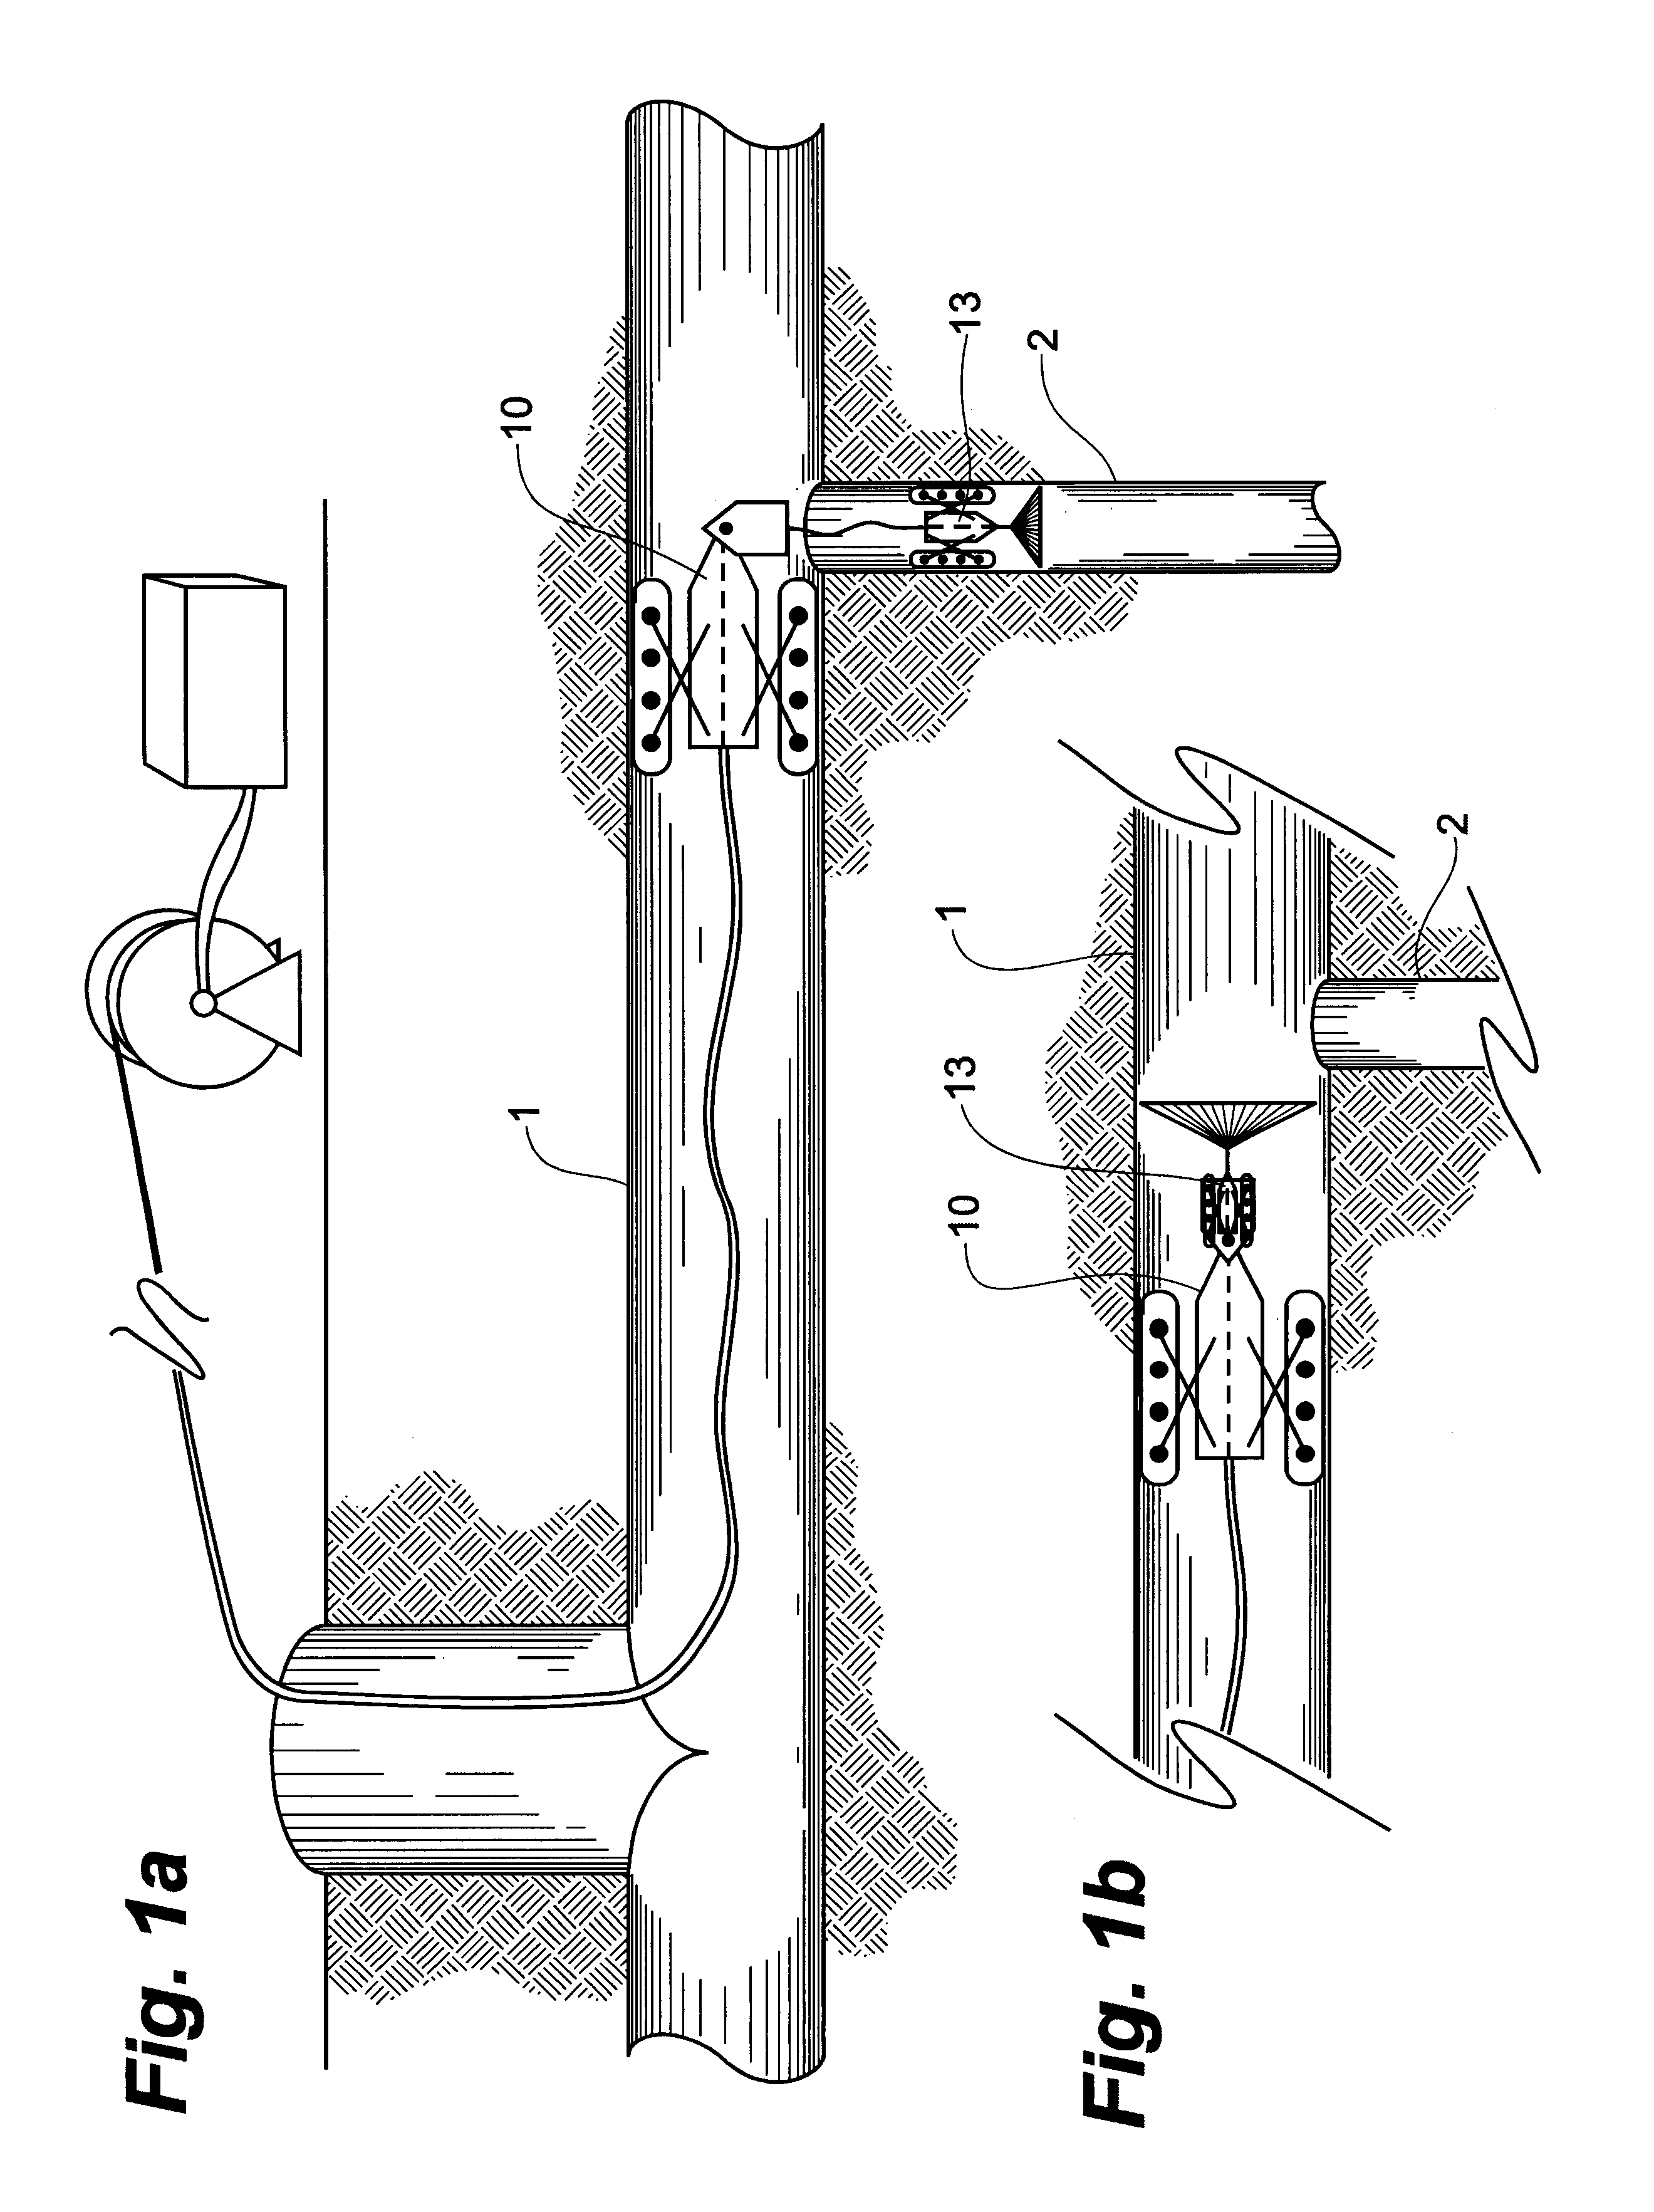 Robotic apparatus and method for treatment of conduits